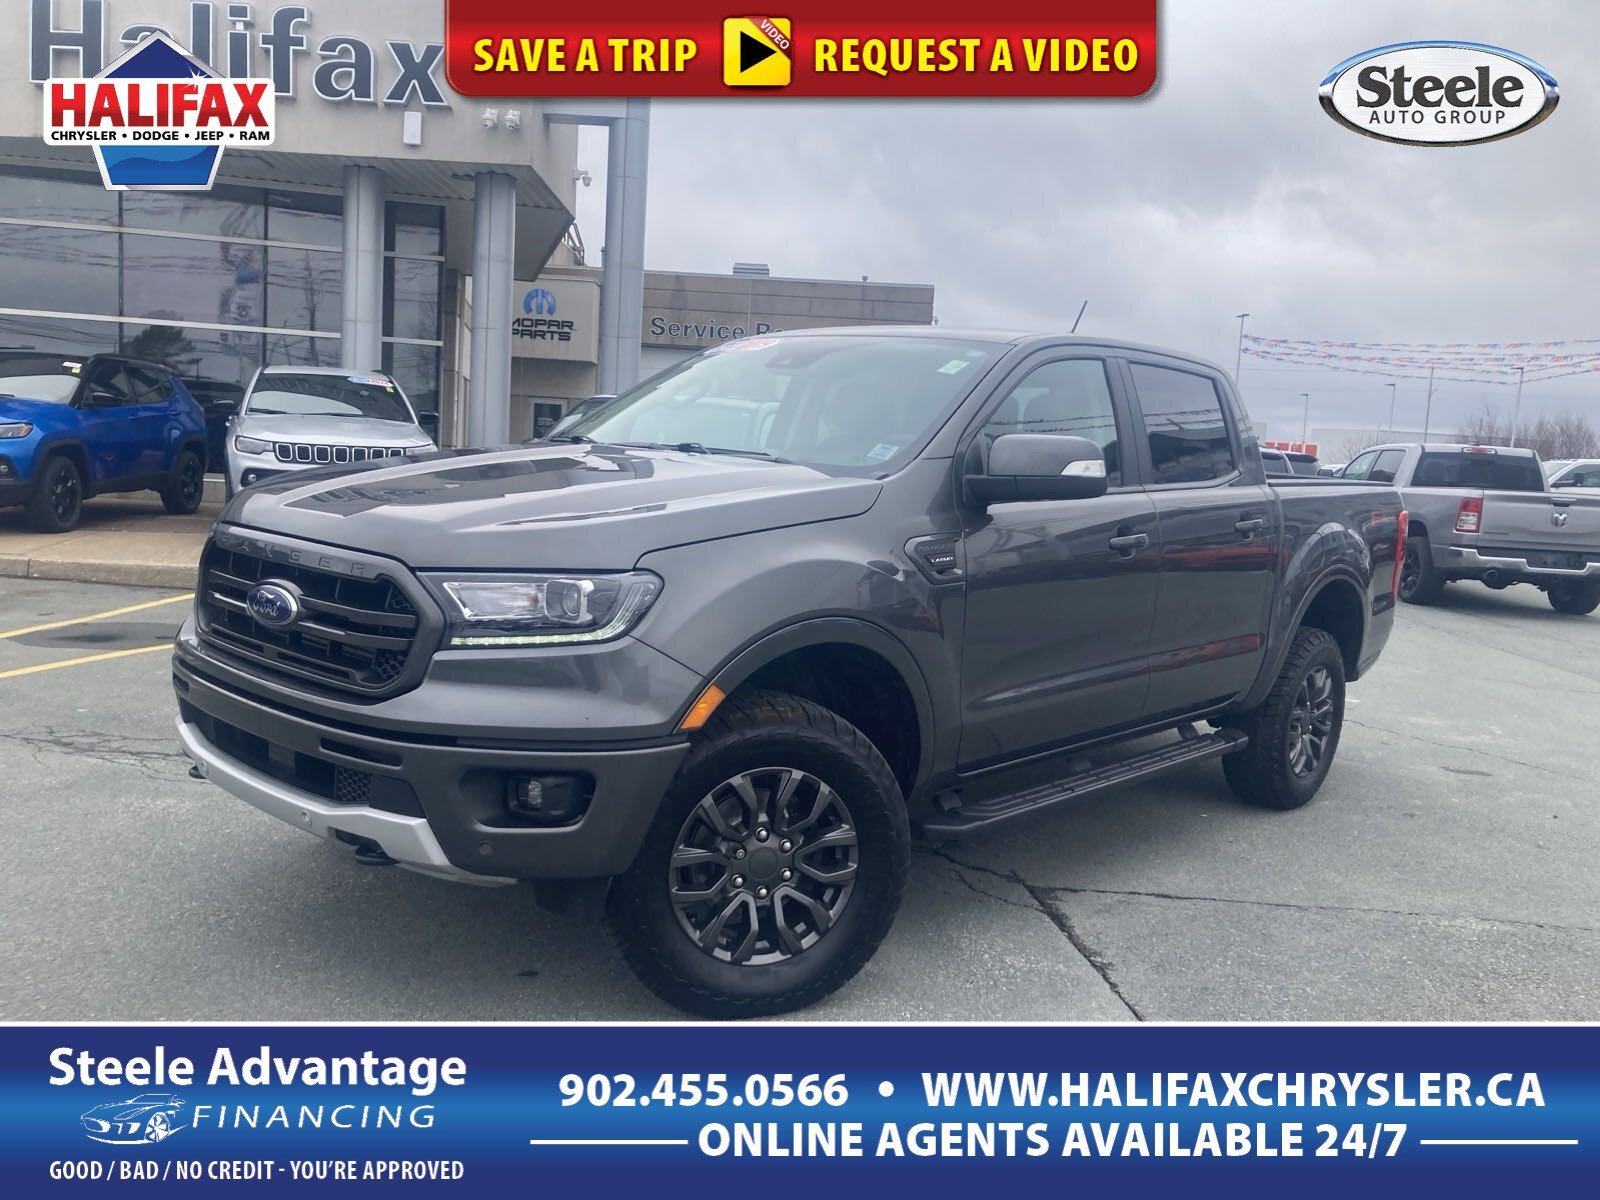 2019 Ford Ranger XLT - LOW KM, ONE OWNER, NAV, HEATED LEATHER SEATS